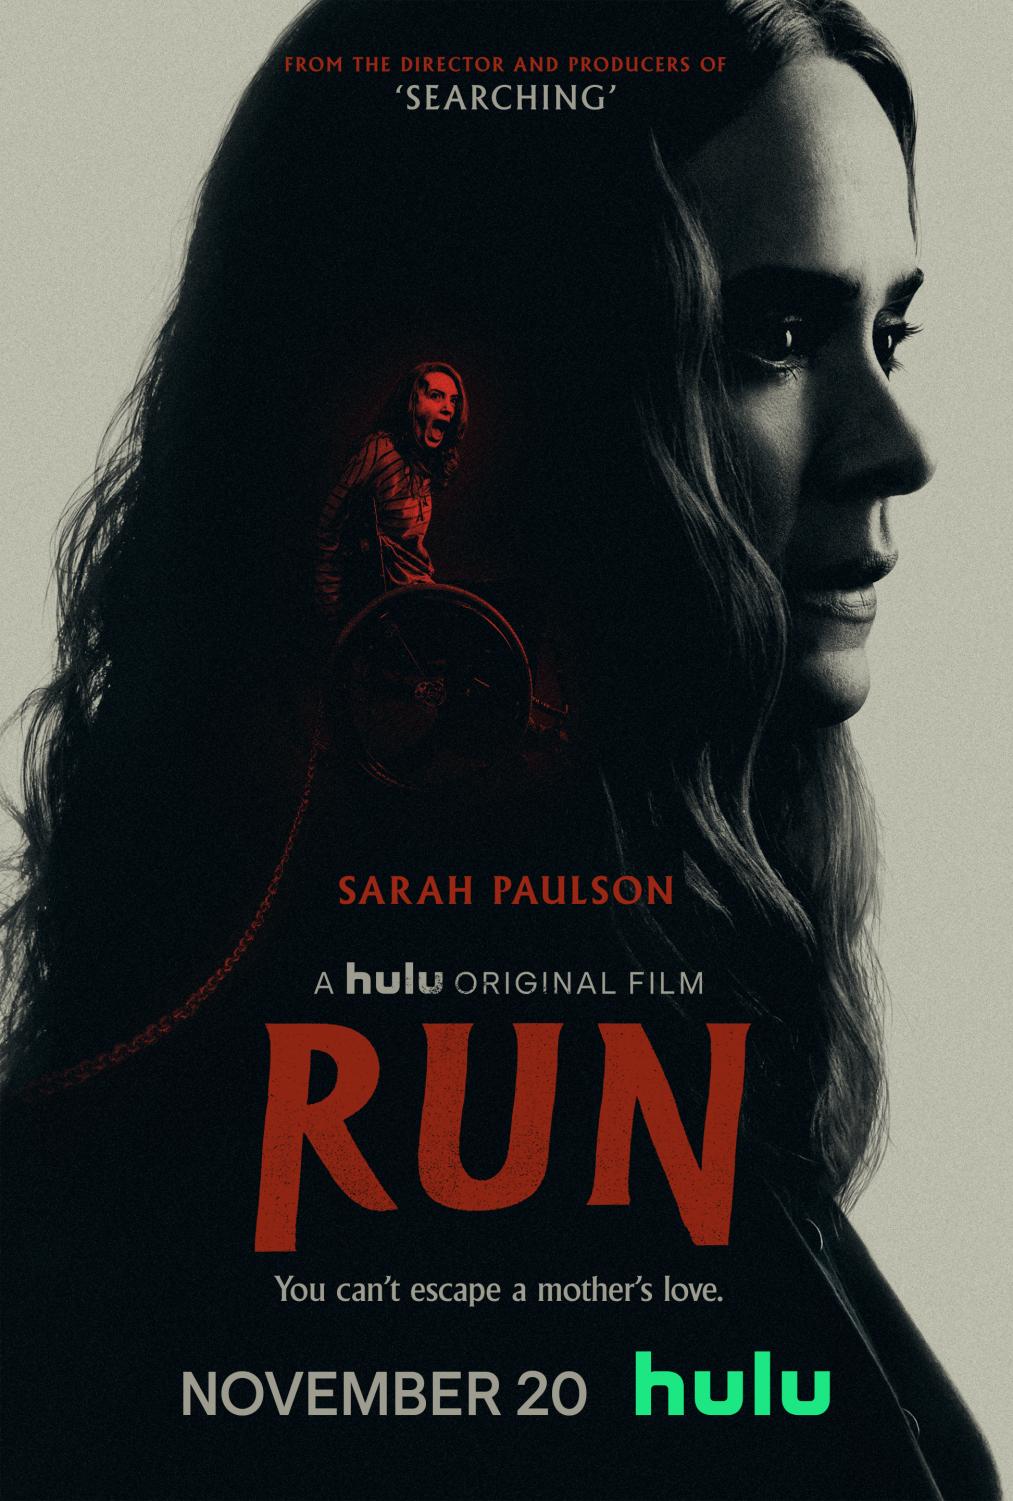 Psychological thriller Run defies typical genre gimmicks, keeps viewers guessing